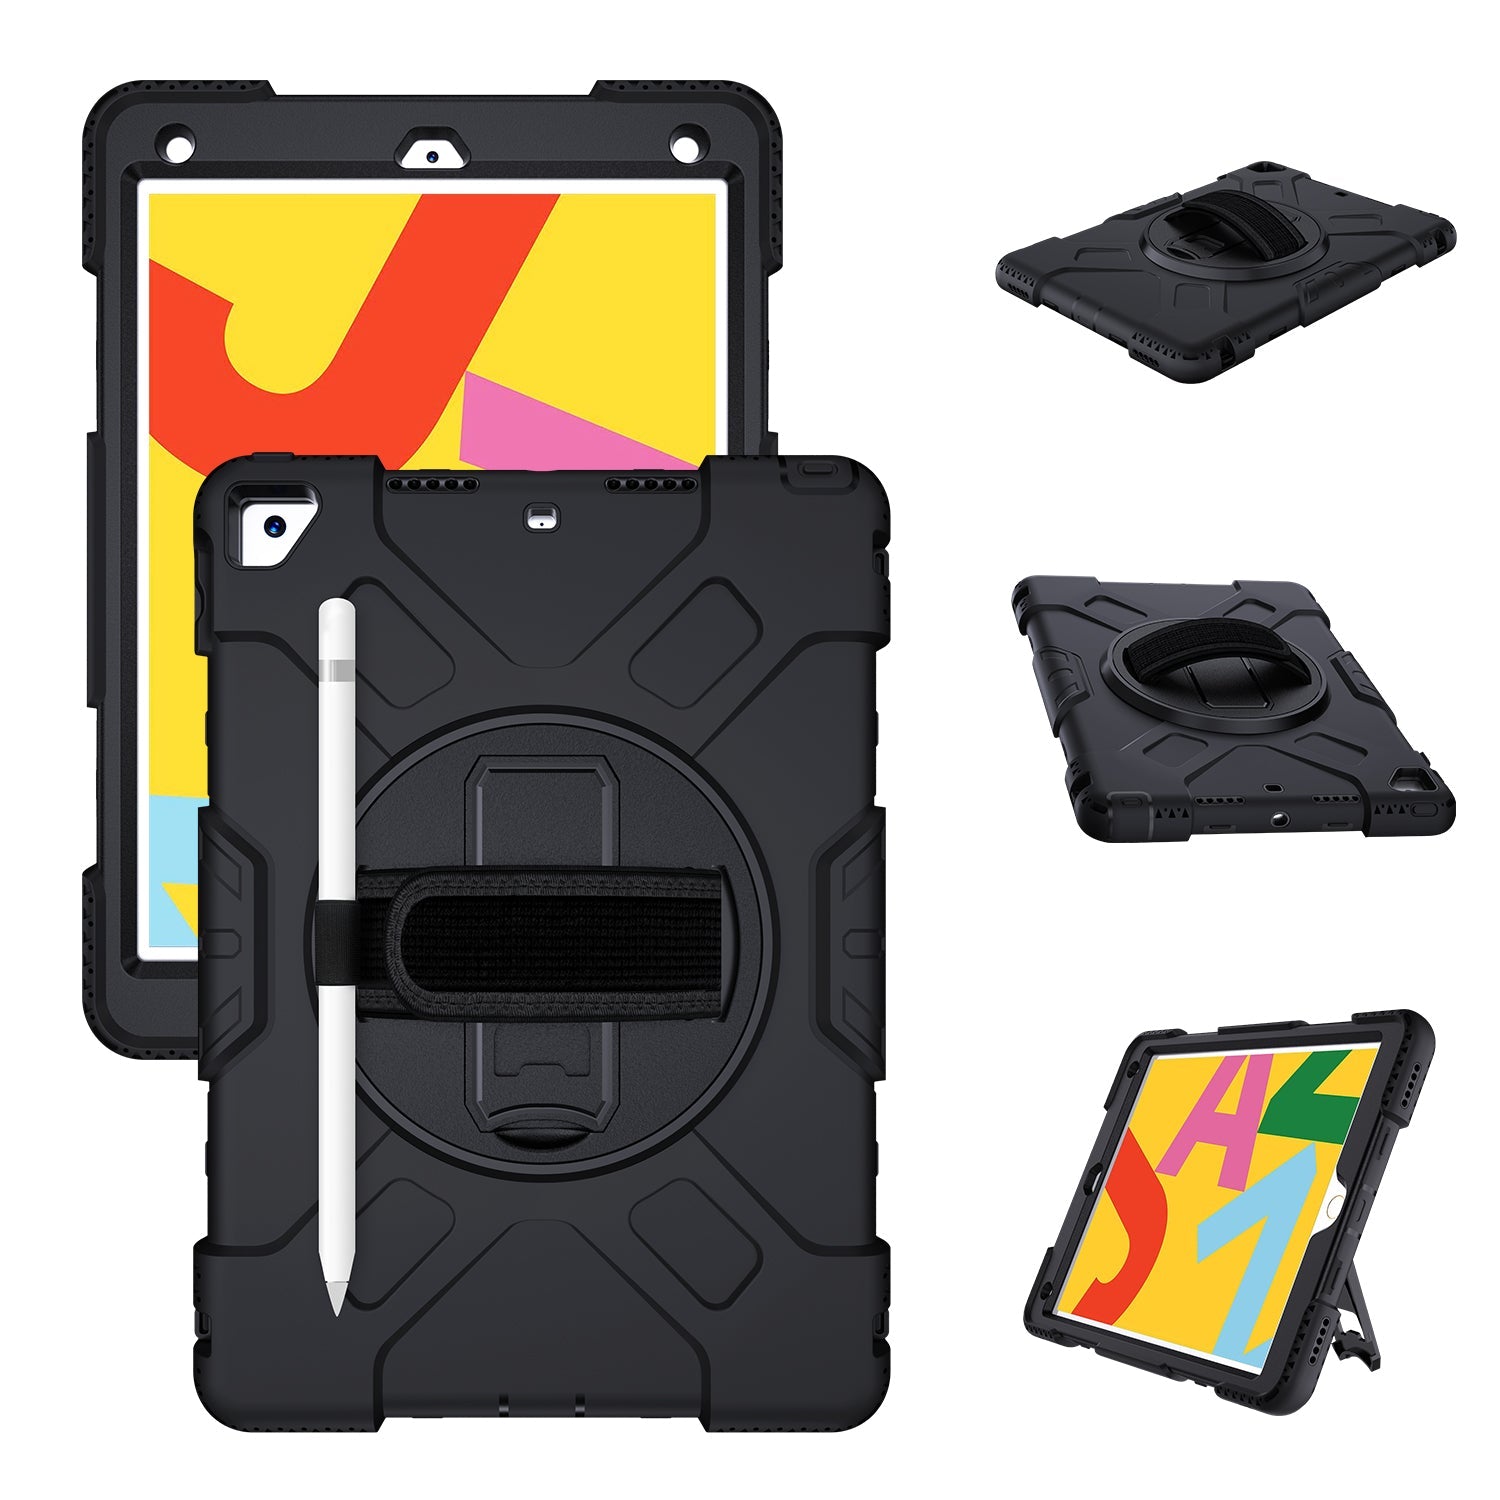 Tough On iPad Air 3 / Pro 2 10.5" Case Rugged Protection Black